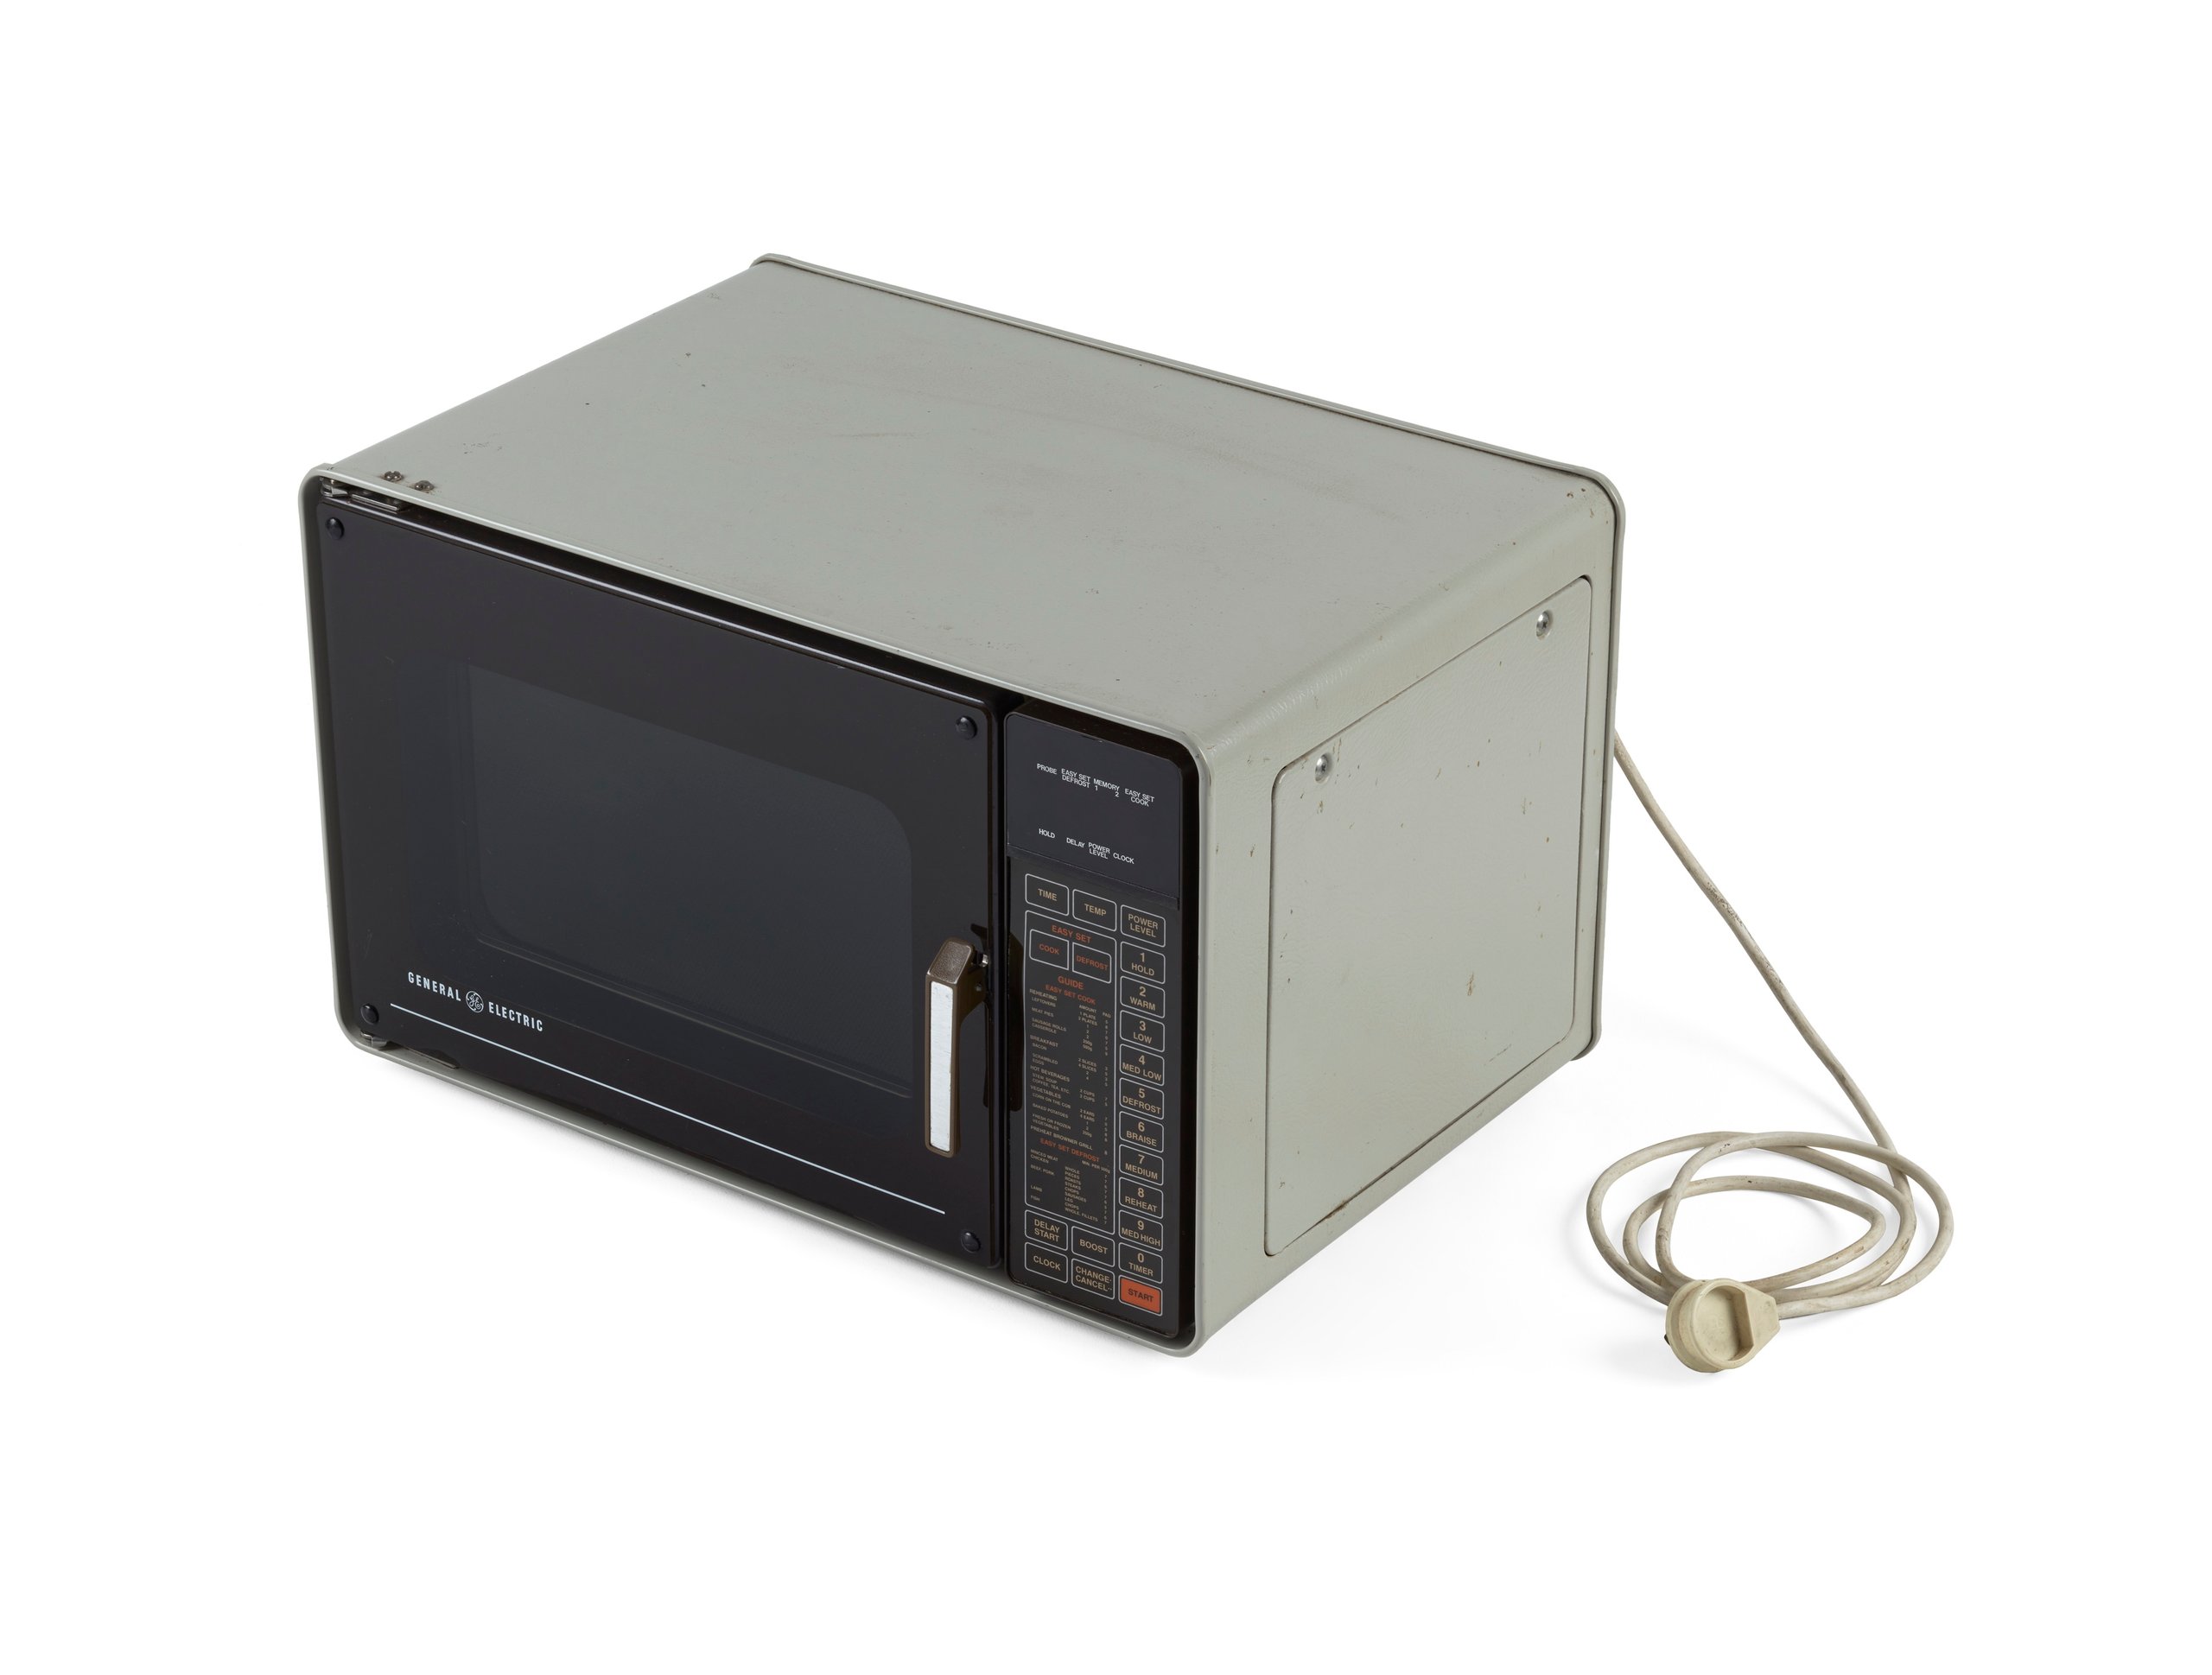 'ME710' microwave oven by General Electric